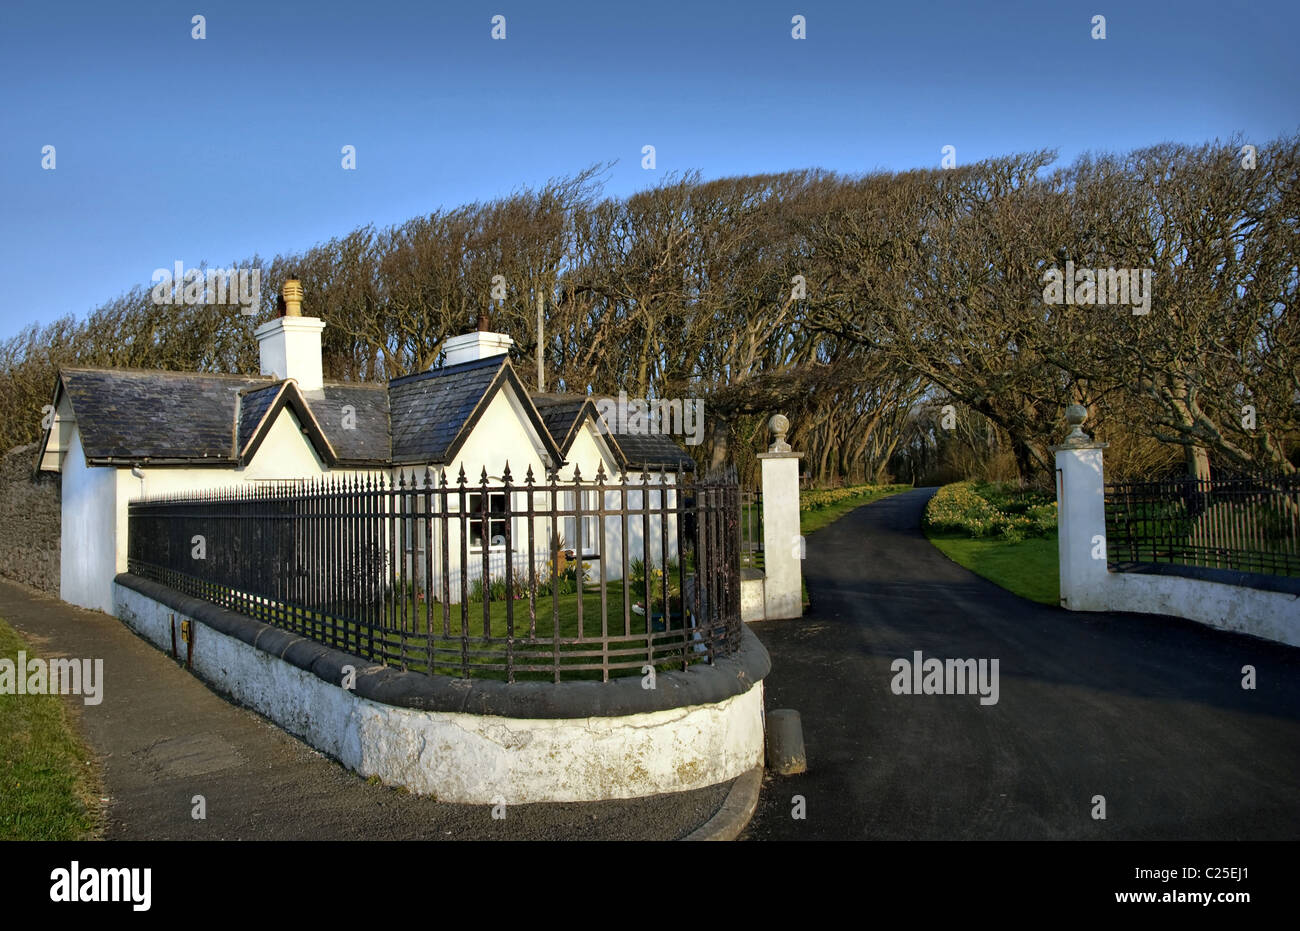 White Gate house and Driveway in Forest Stock Photo